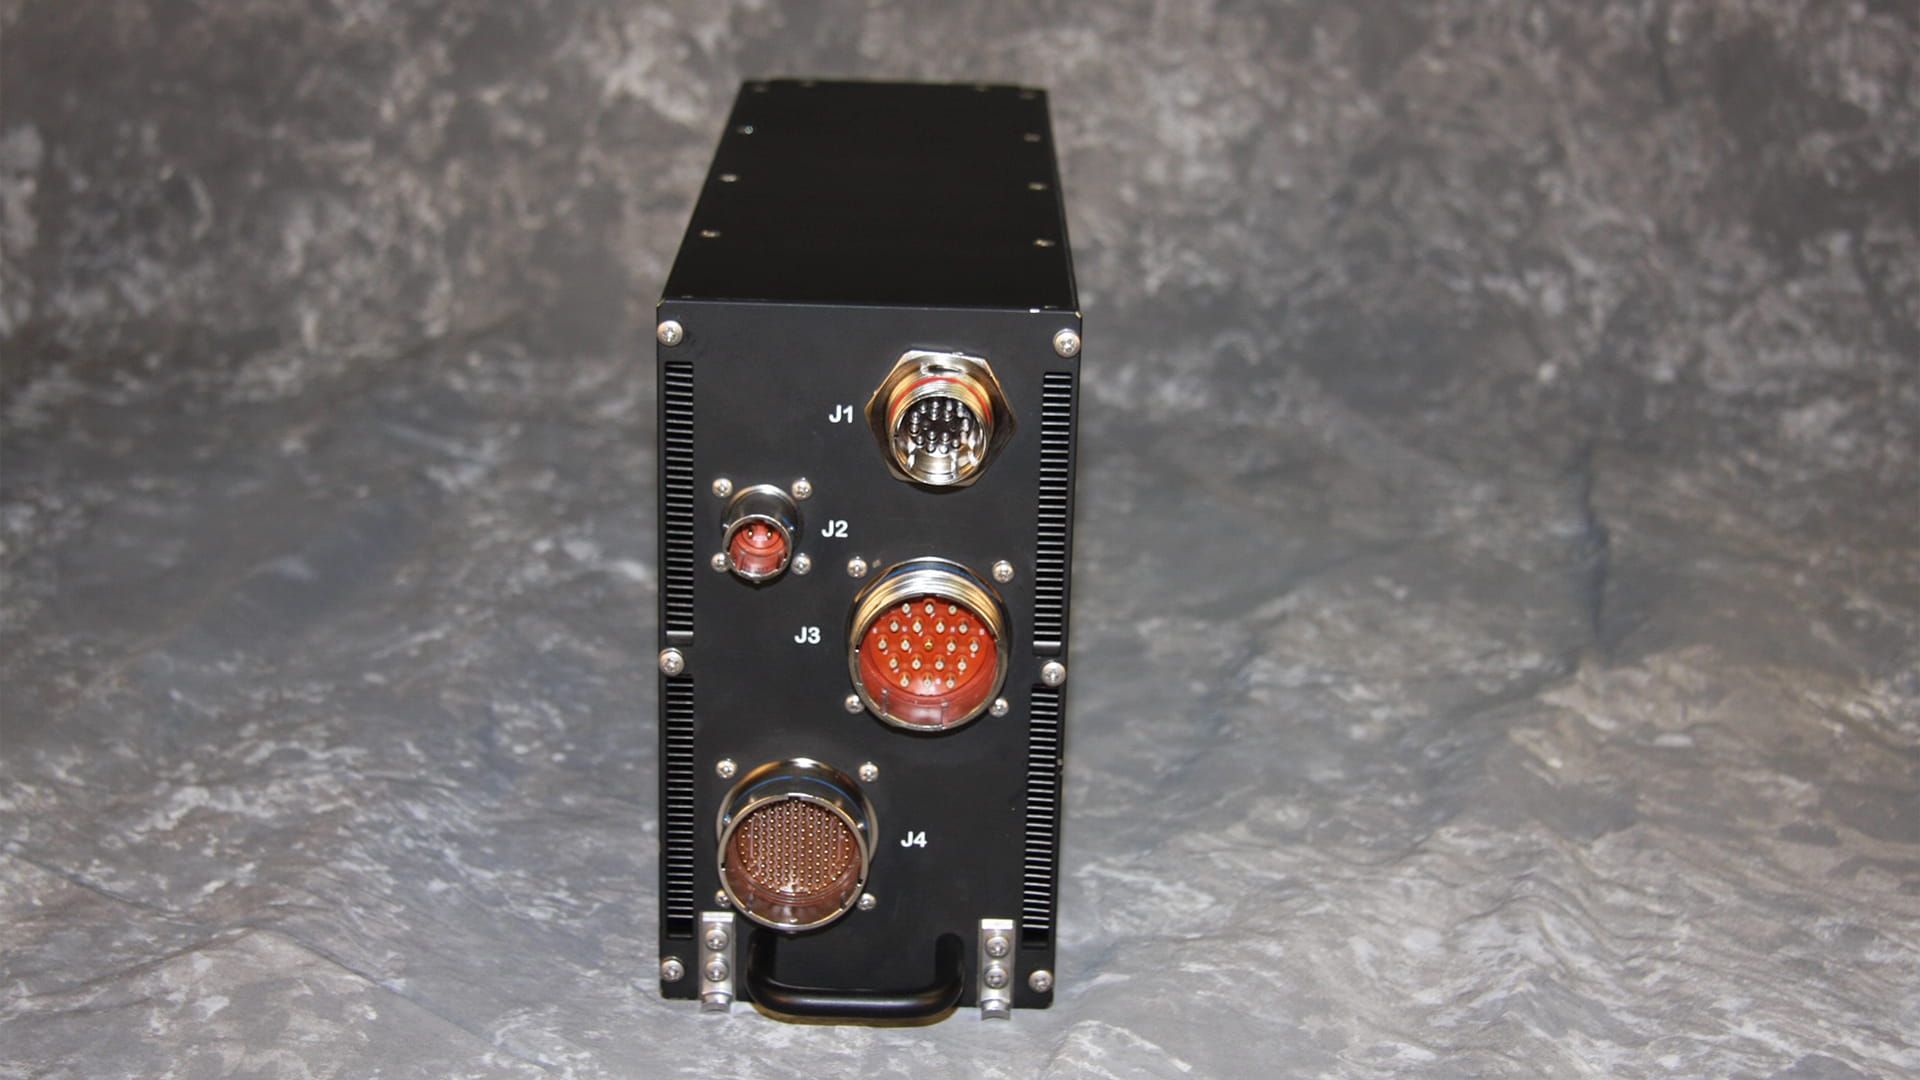 Collins Aerospace is developing a Software Programmable Open Mission Systems (OMS) Compliant (SPOC) radio for the U.S. Air Force as part of a $18.9 million competitive contract awarded in 2019.